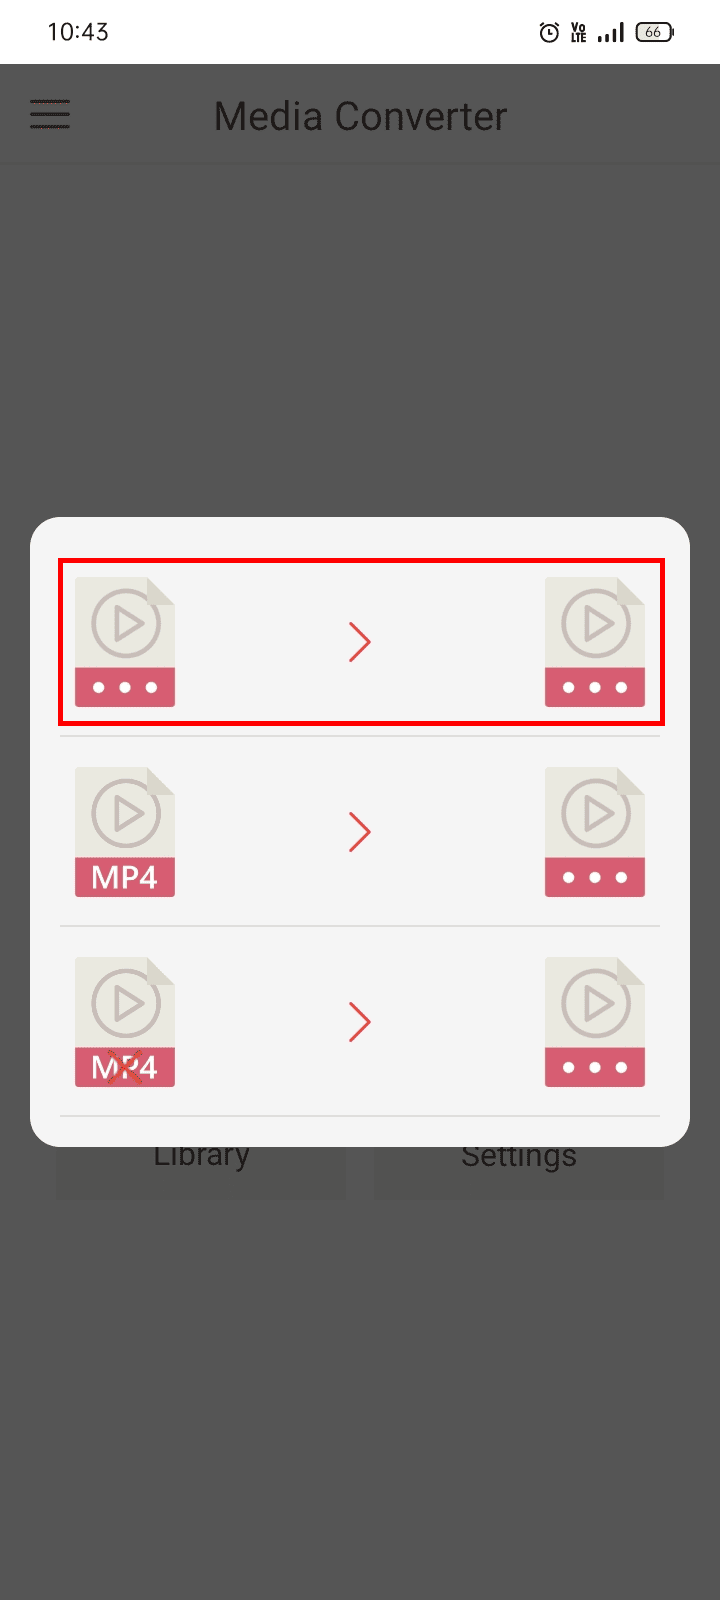 Tap on the first option for conversion.